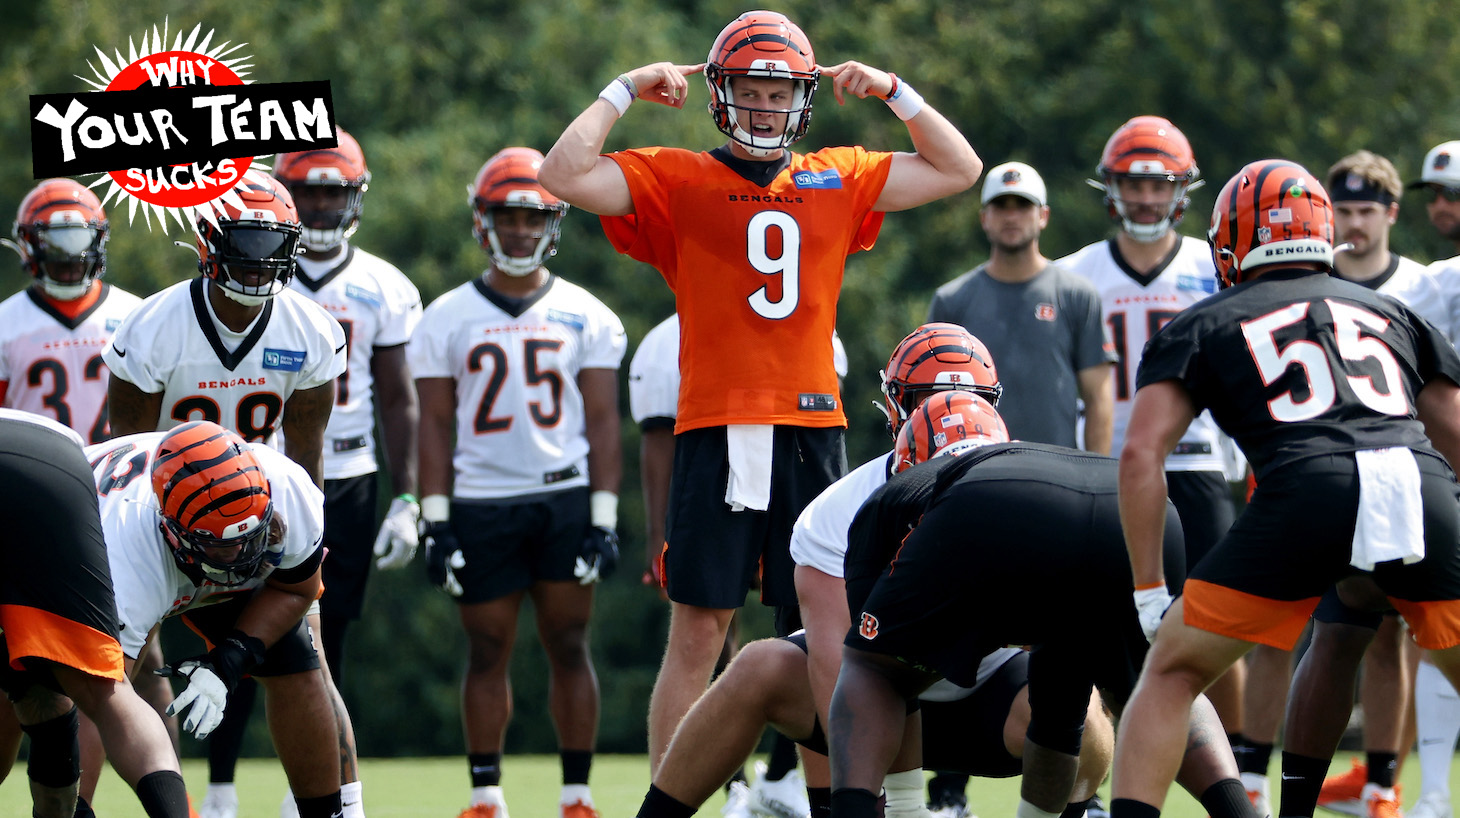 CINCINNATI, OHIO - JULY 28: Joe Burrow #9 of the Cincinnati Bengals calls out instructions during training camp on July 28, 2021 in Cincinnati, Ohio. (Photo by Dylan Buell/Getty Images)